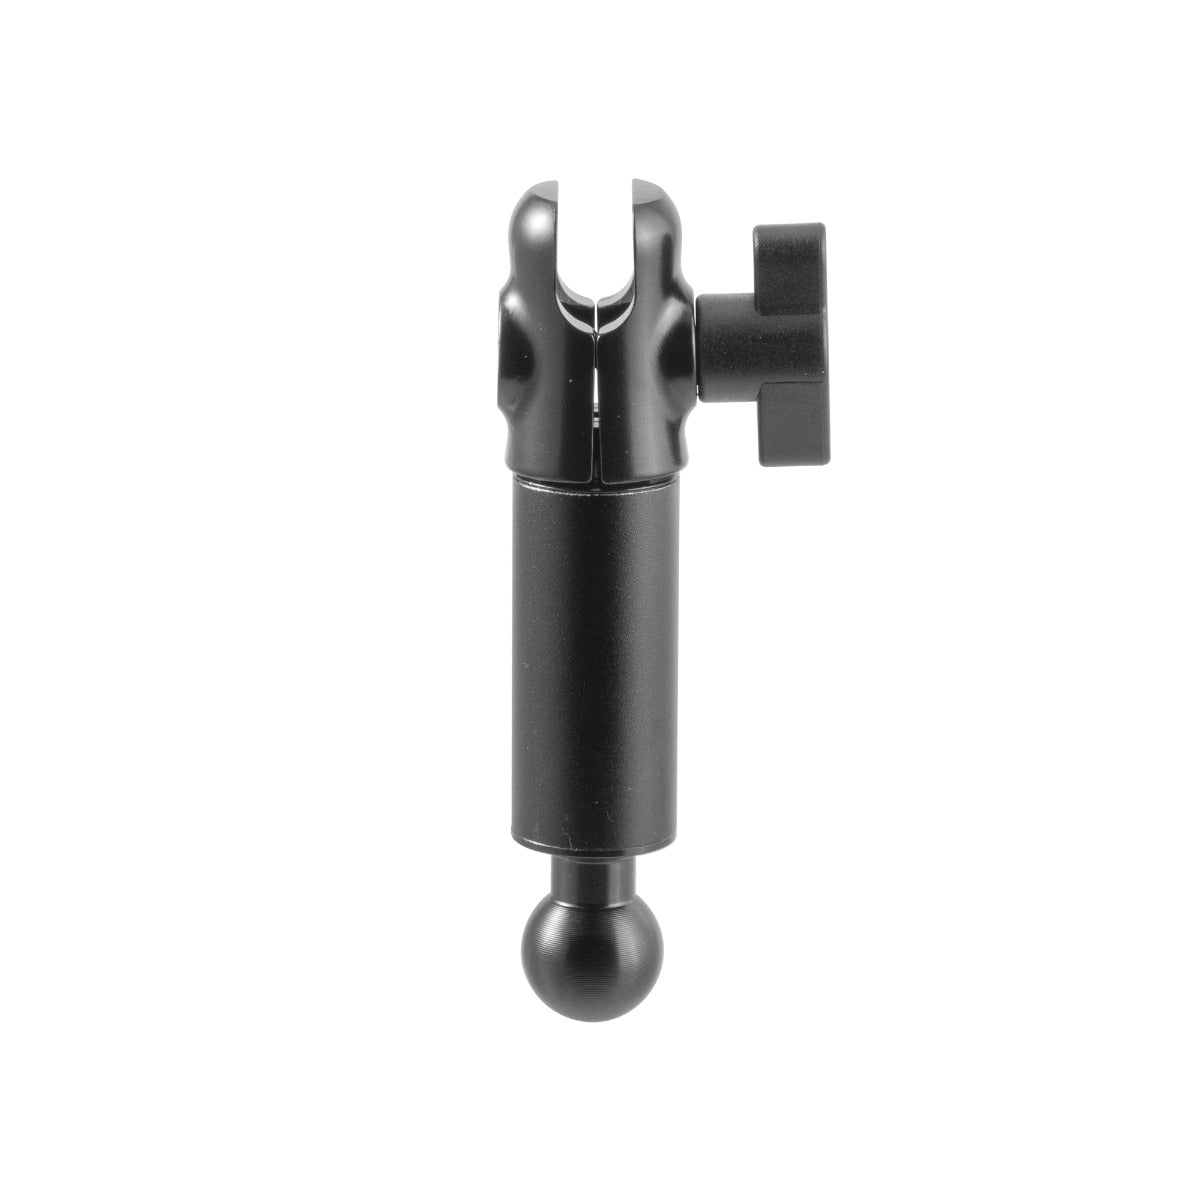 iBOLT™ FixedPro 360 4.5 inch Aluminum Extension arm